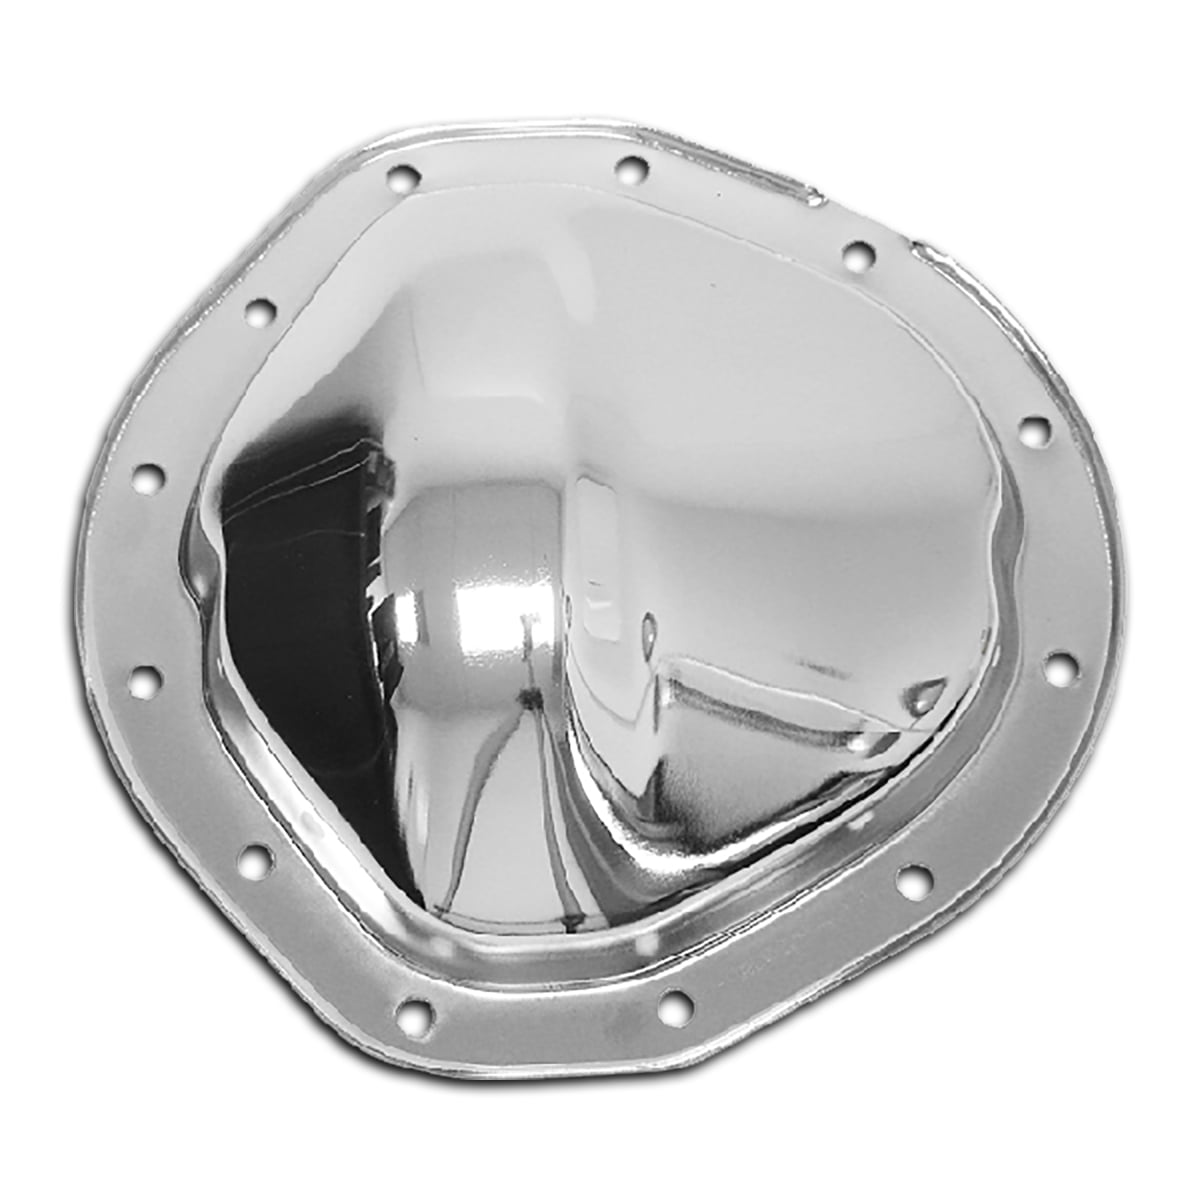 12 BOLT 8.75" RING GEAR CHROME REAR DIFFERENTIAL COVER FOR 62-82 CHEVY GMC TRUCK